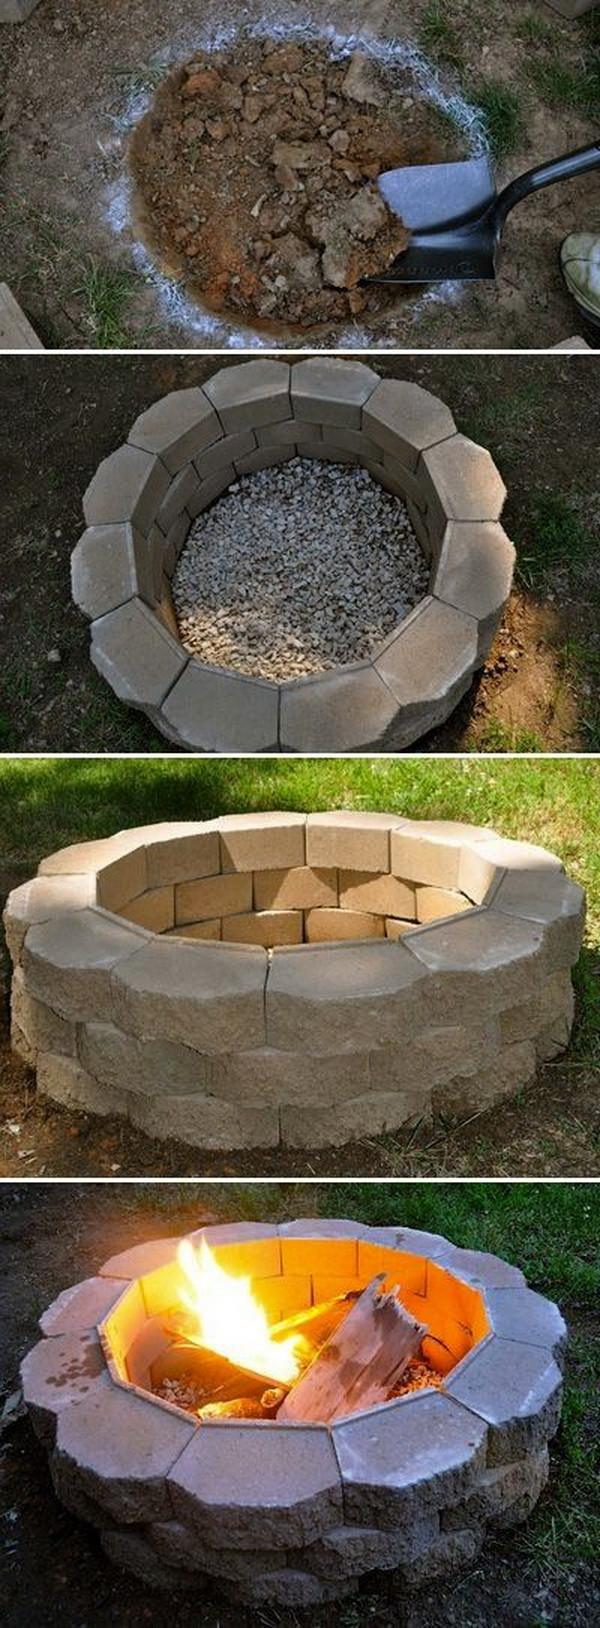 Diy Outdoor Fire Pit
 20 DIY Fire Pits for Your Backyard with Tutorials